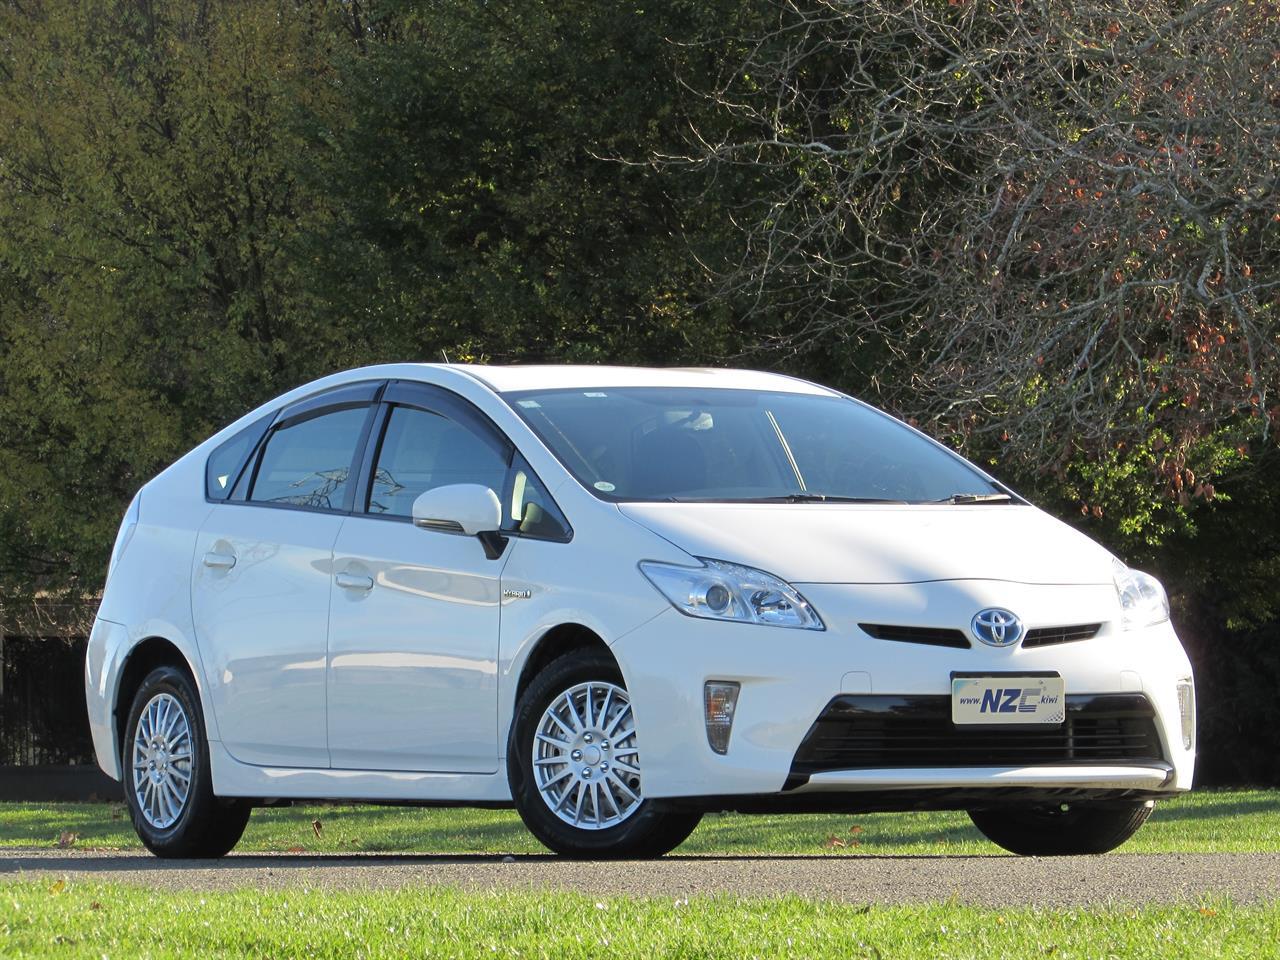 NZC best hot price for 2015 Toyota PRIUS in Christchurch